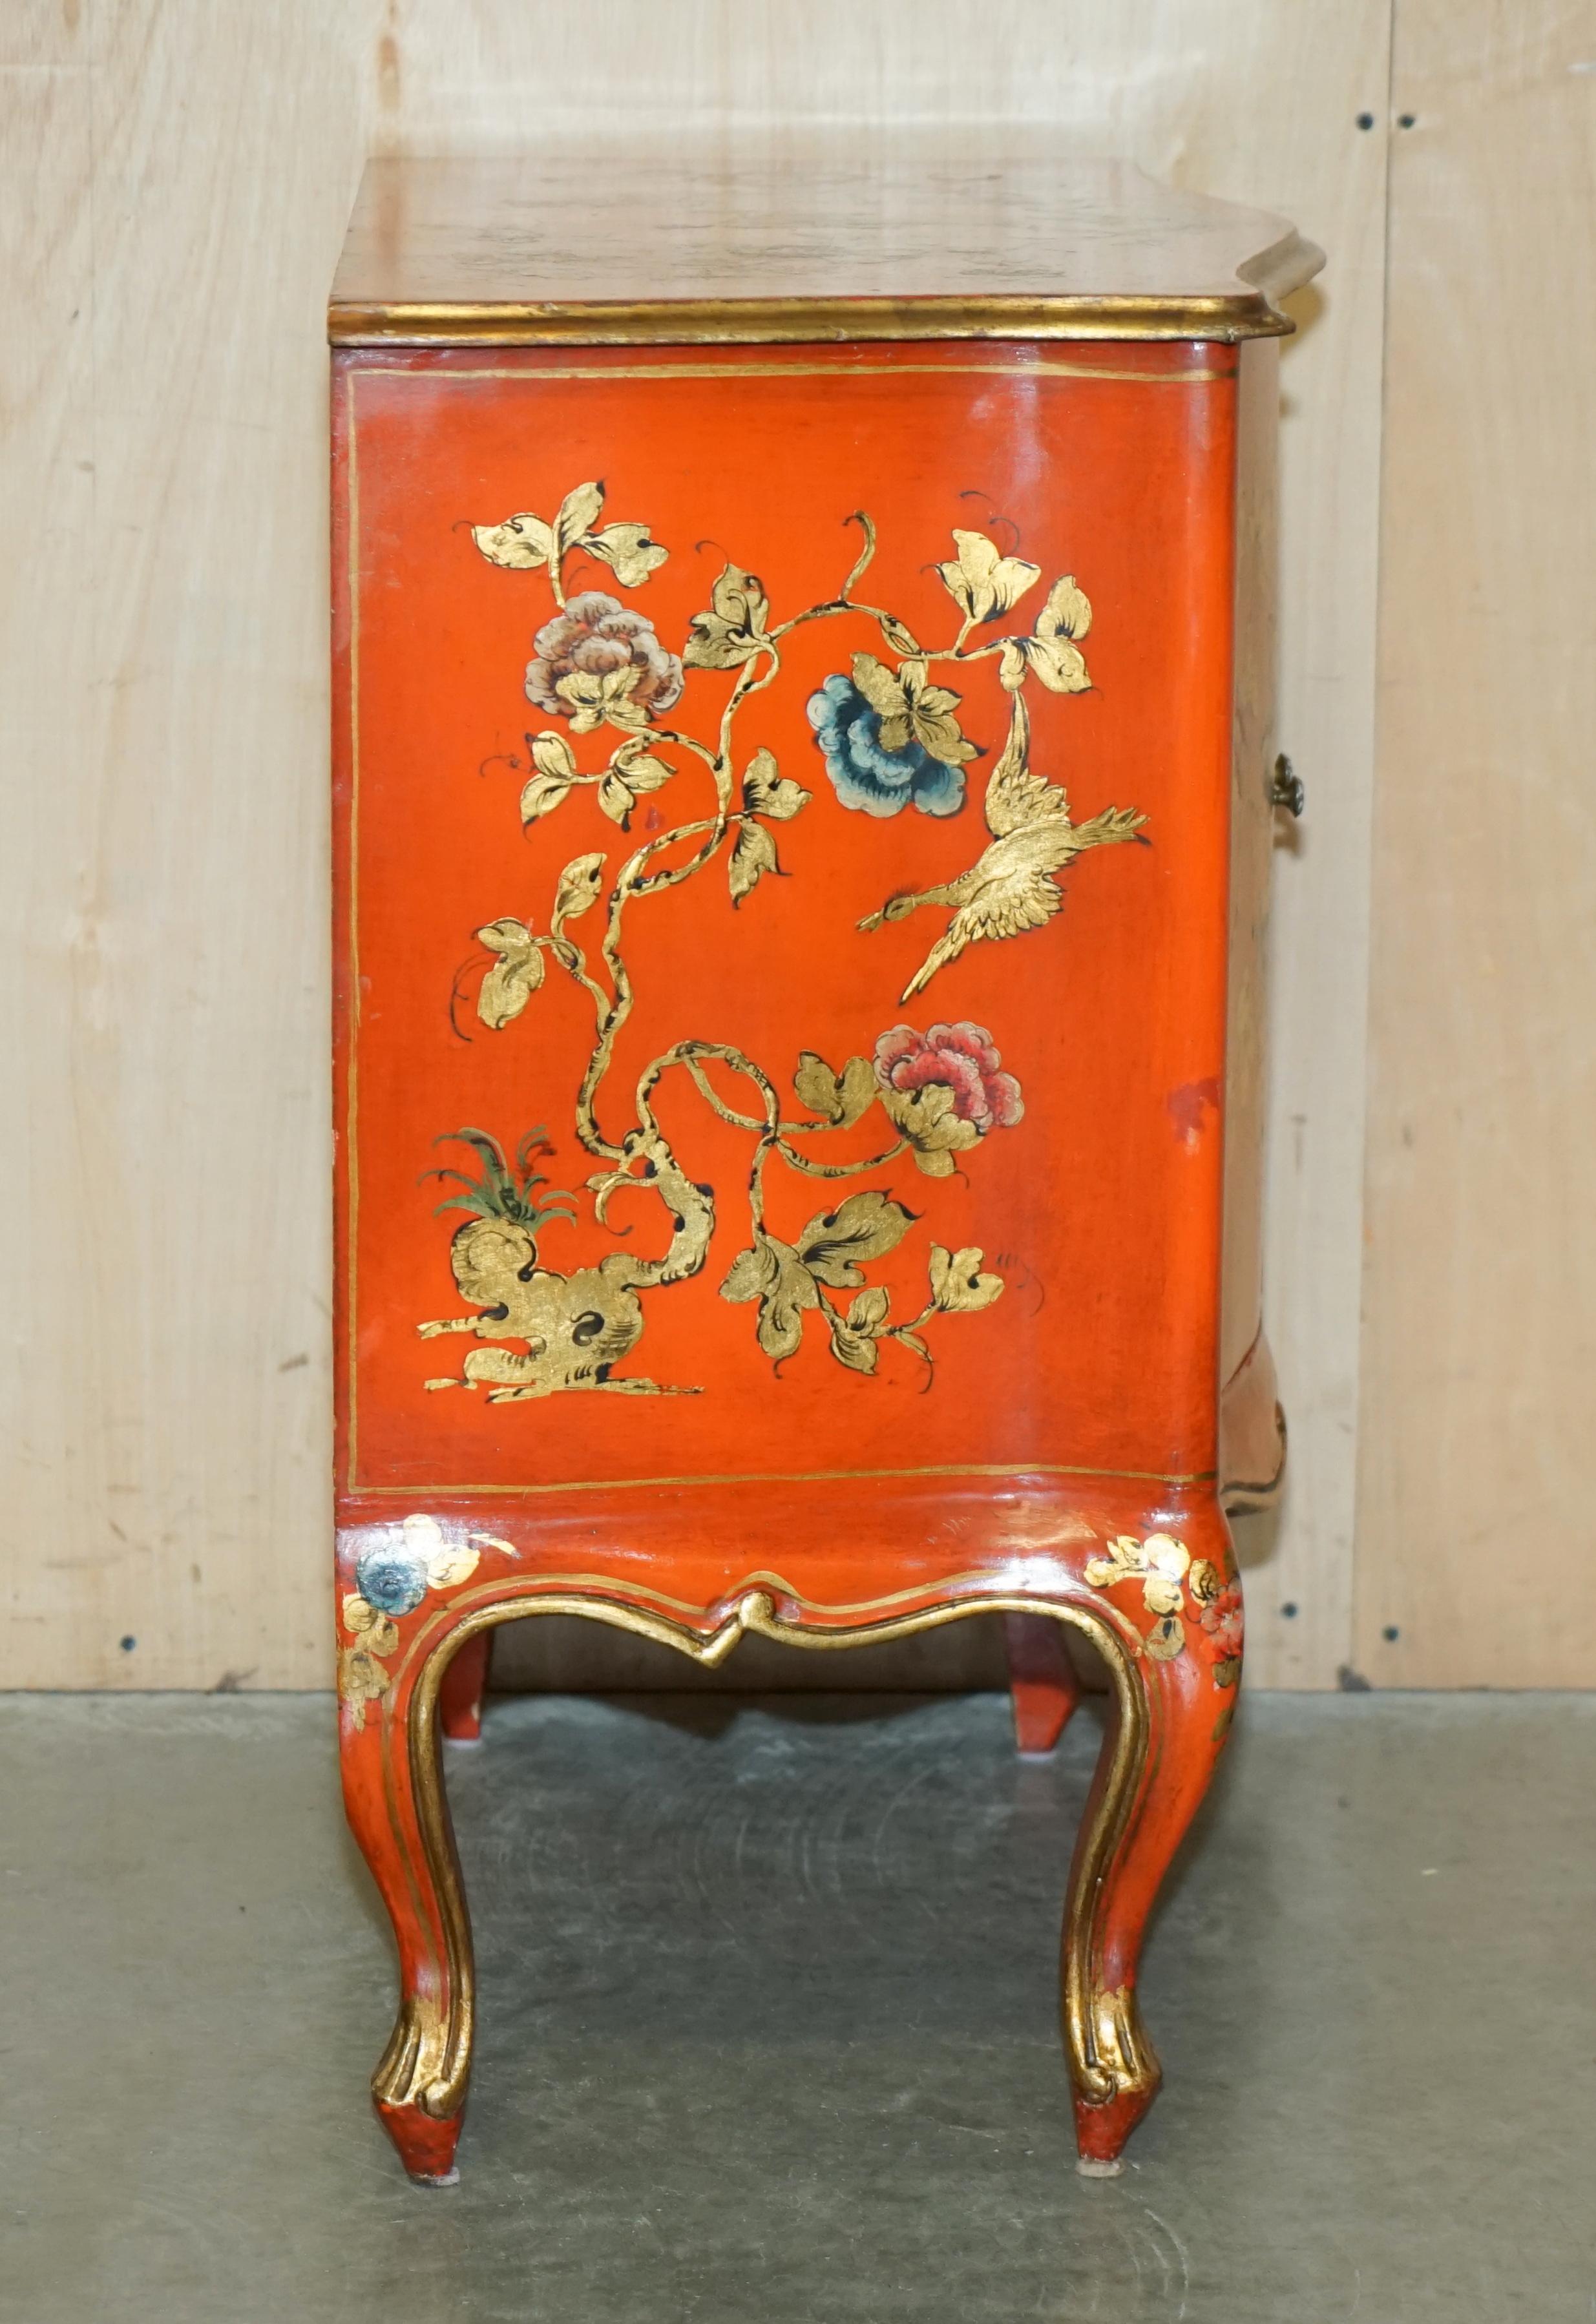 STUNNING 1920's VINTAGE CHINESE CHINOISERIE GEISHA GIRLS LACQUER SIDE CABINET For Sale 7